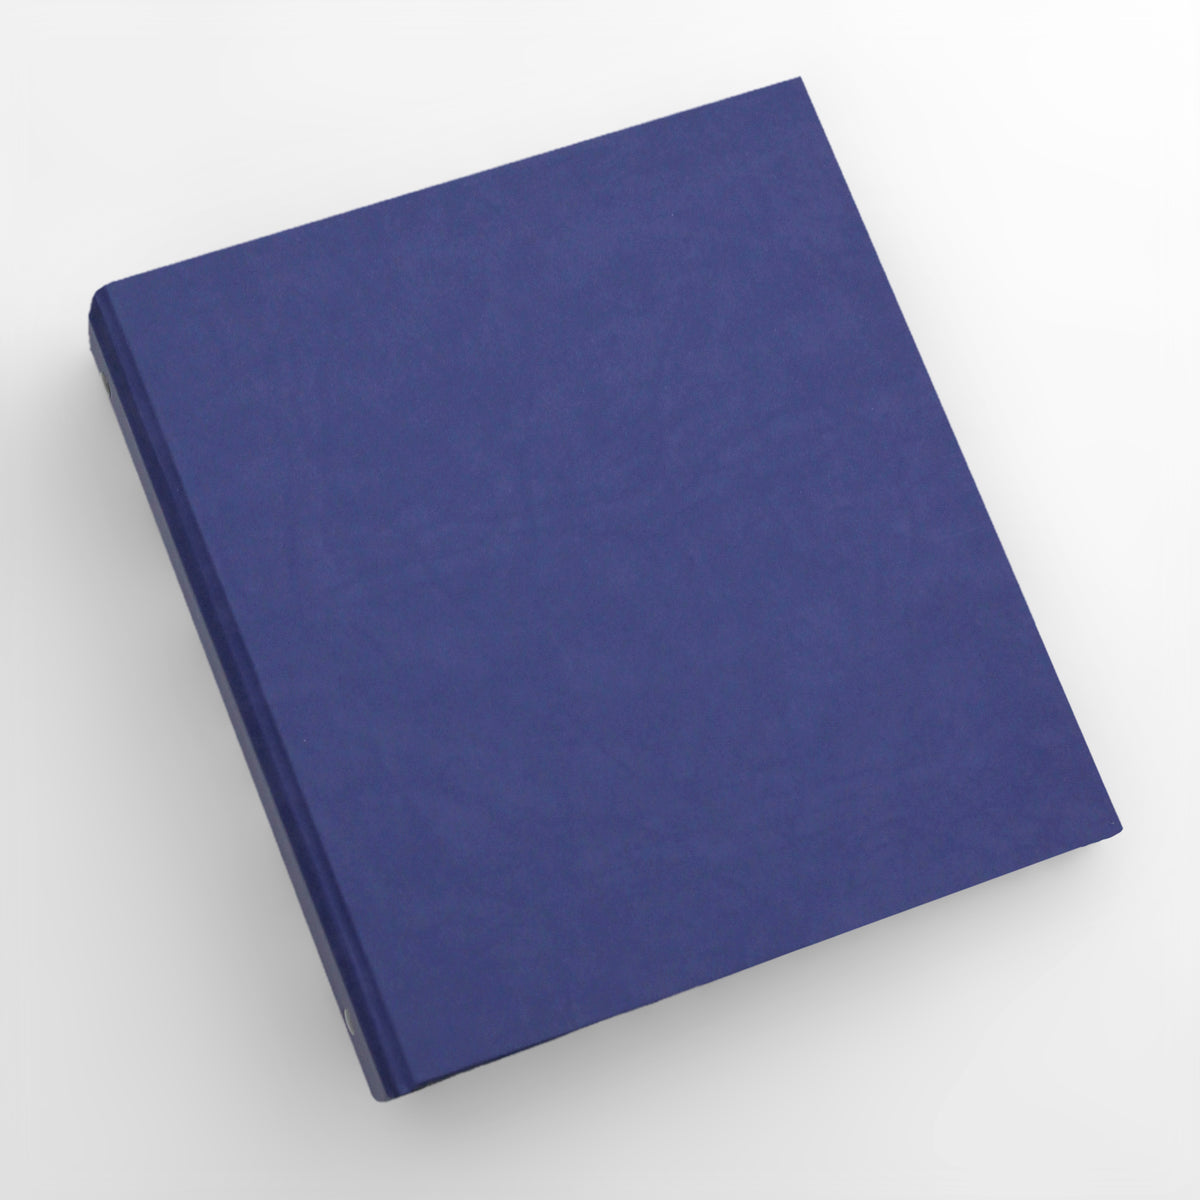 Large Photo Binder | for 8x10 Photos | with Indigo Vegan Leather Cover